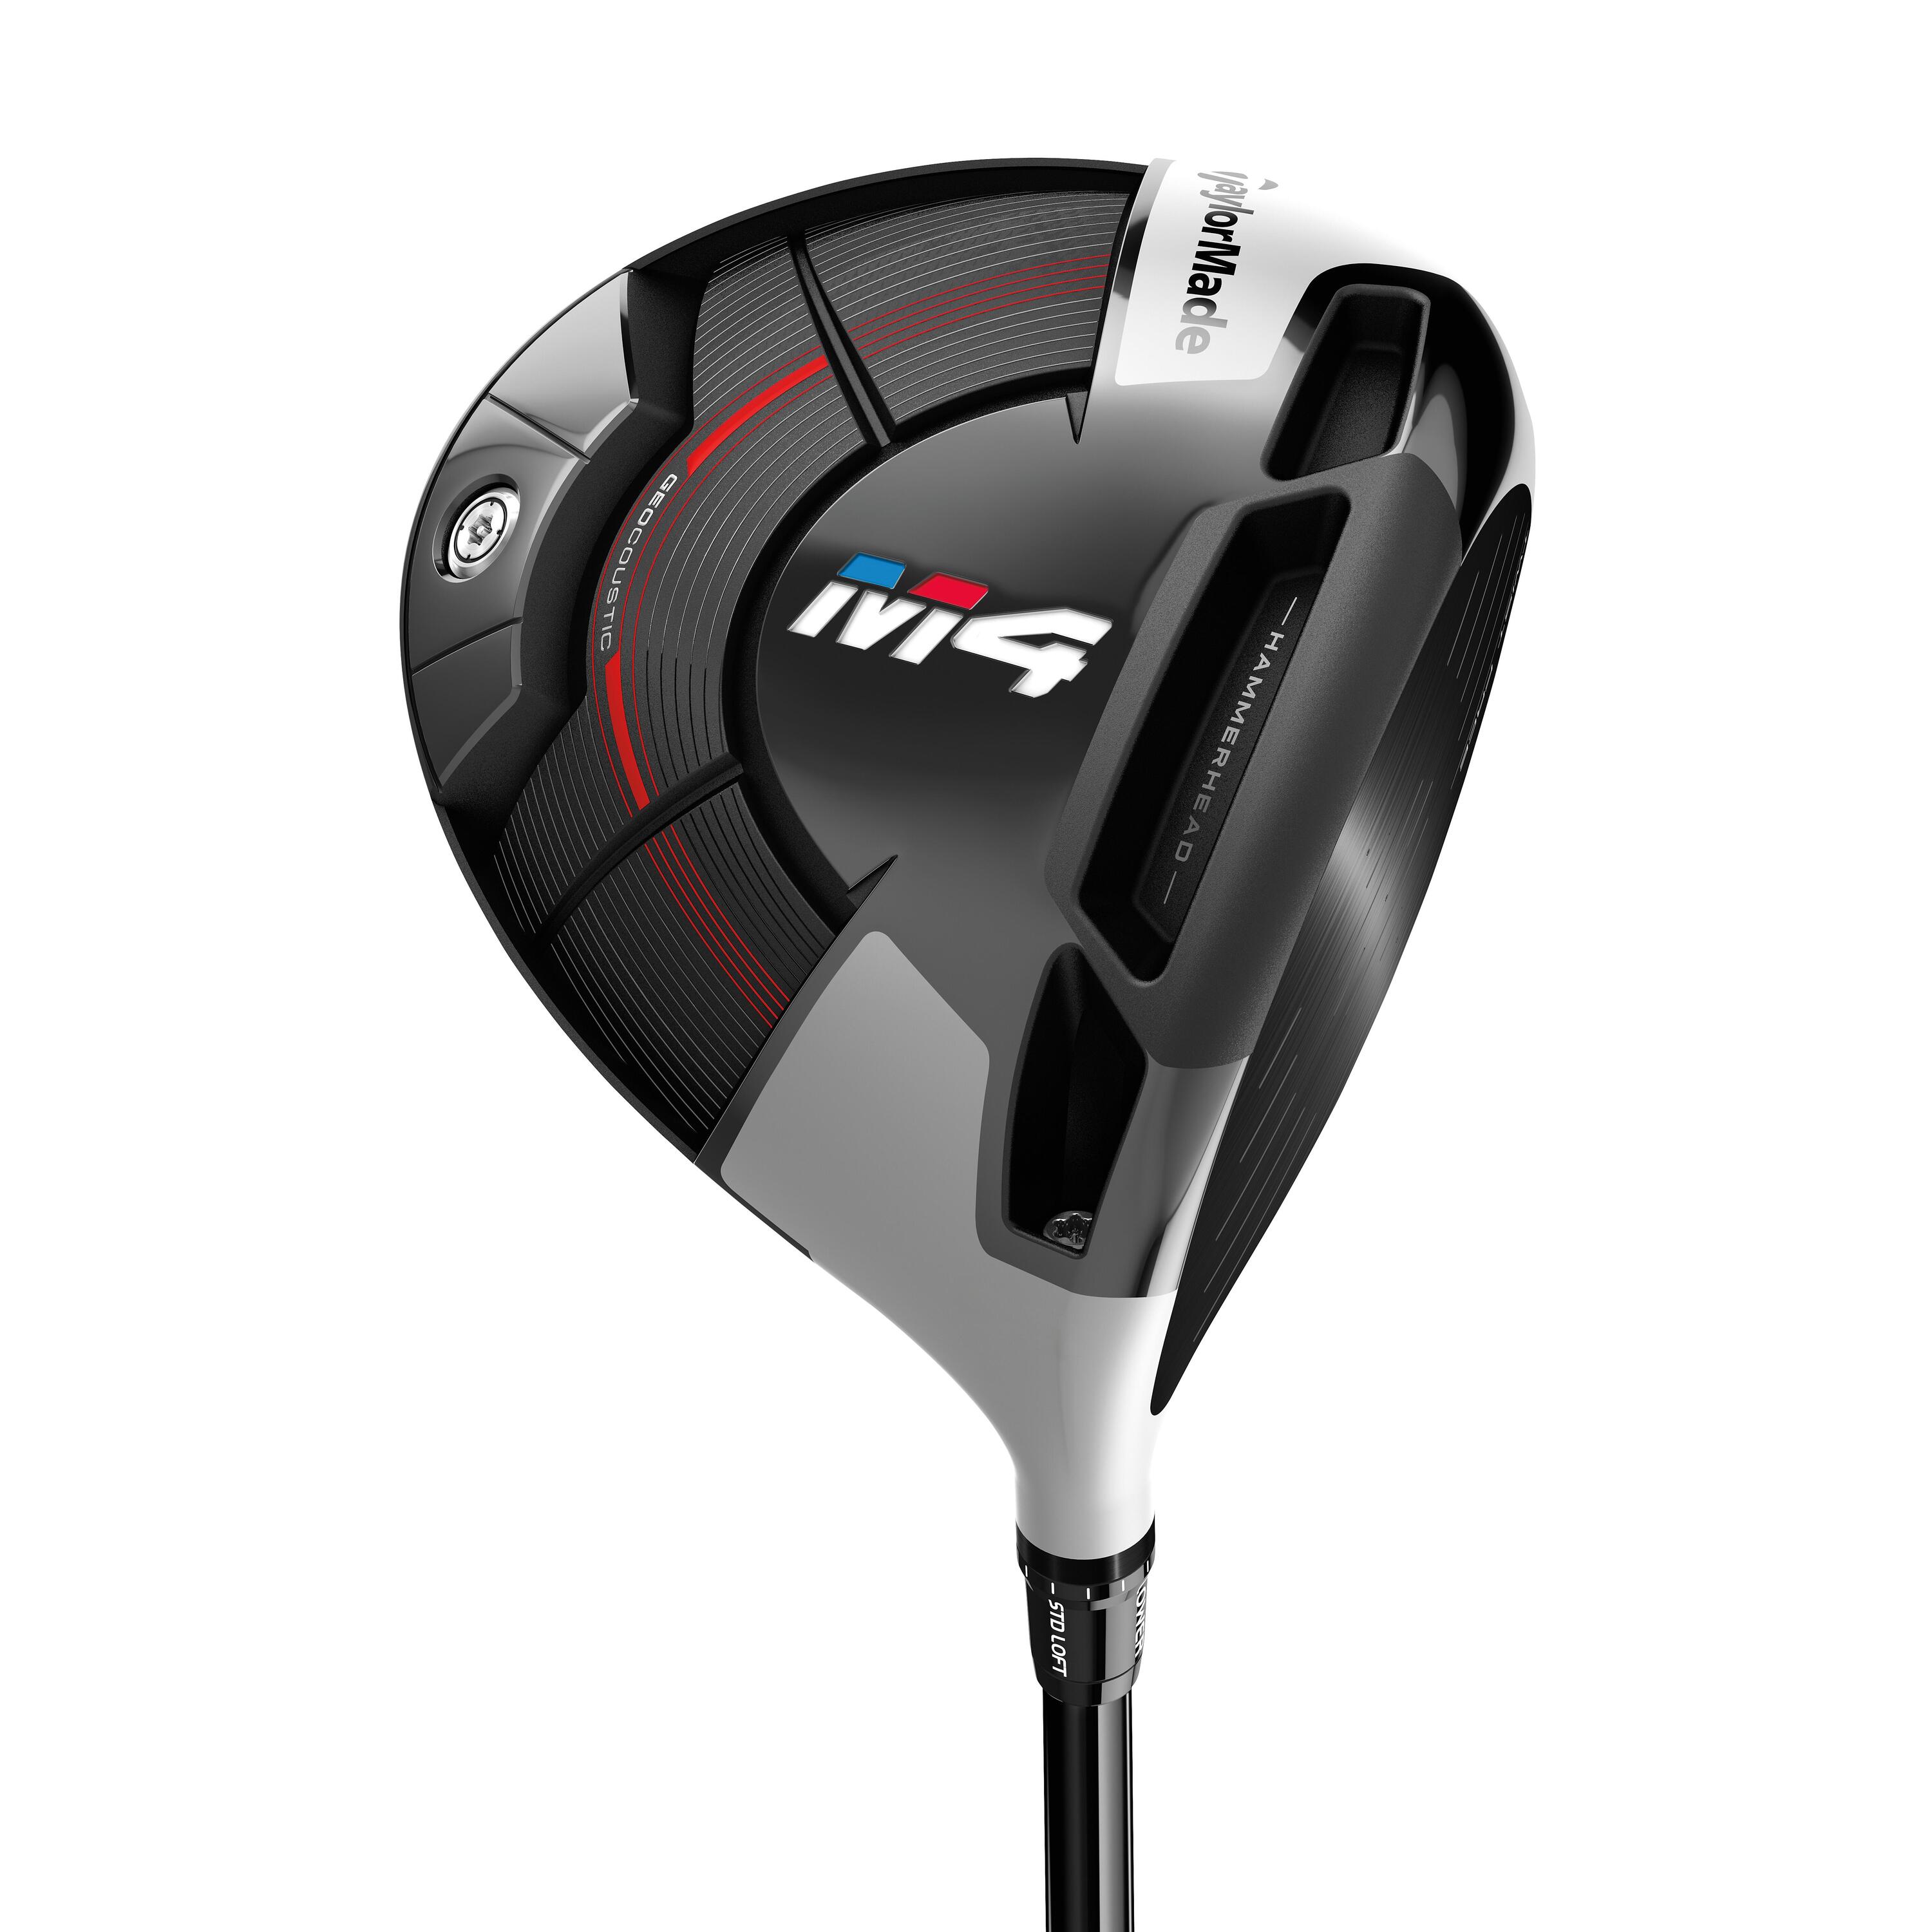 TAYLORMADE WOMEN'S DRIVER GOLF 12° RIGHT HANDED - TAYLORMADE M4